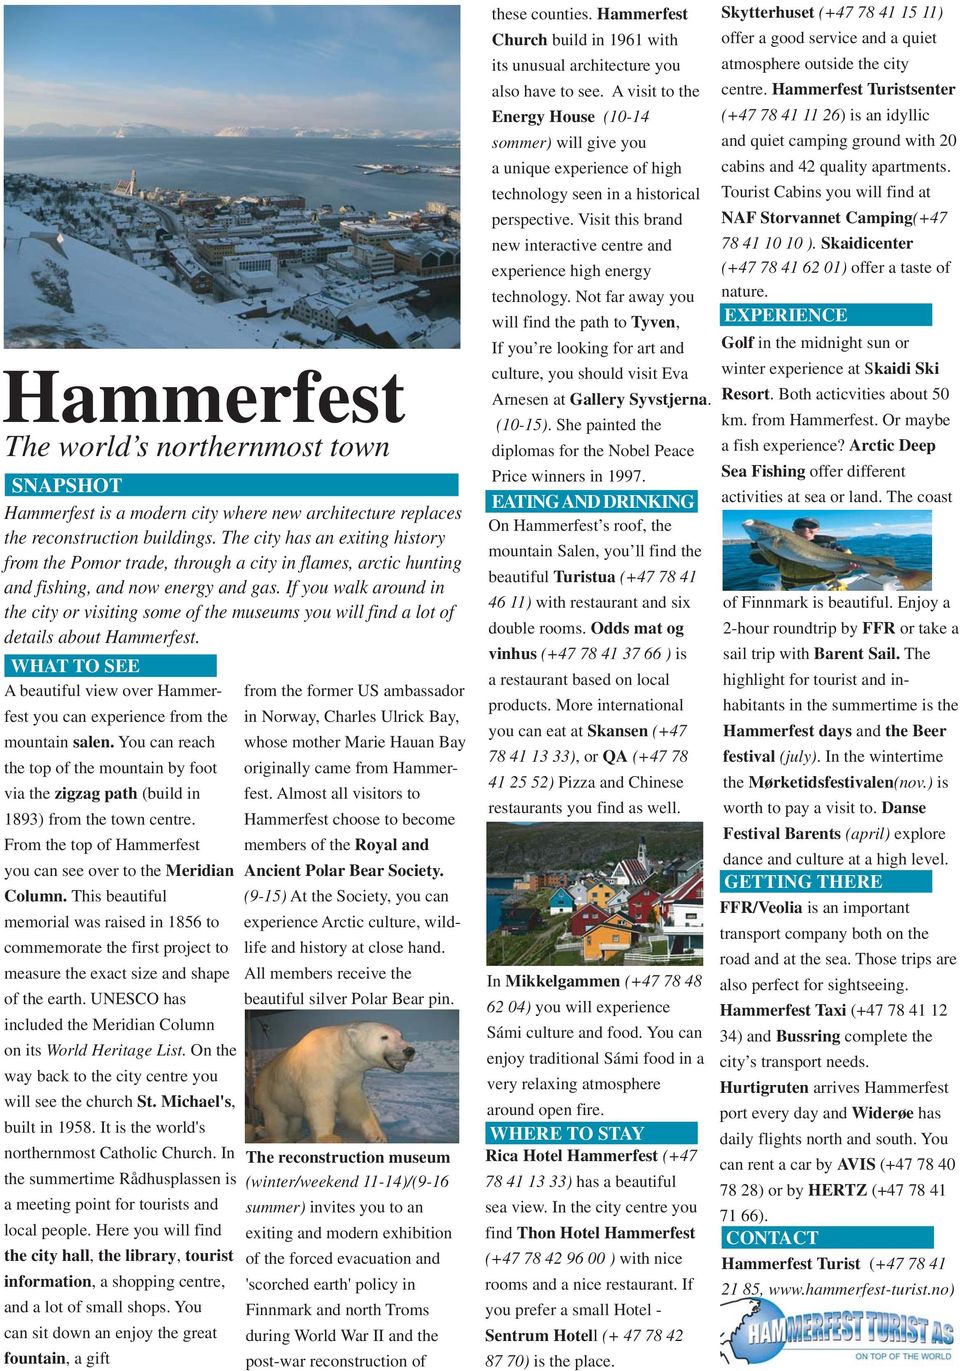 If you walk around in the city or visiting some of the museums you will find a lot of details about Hammerfest.